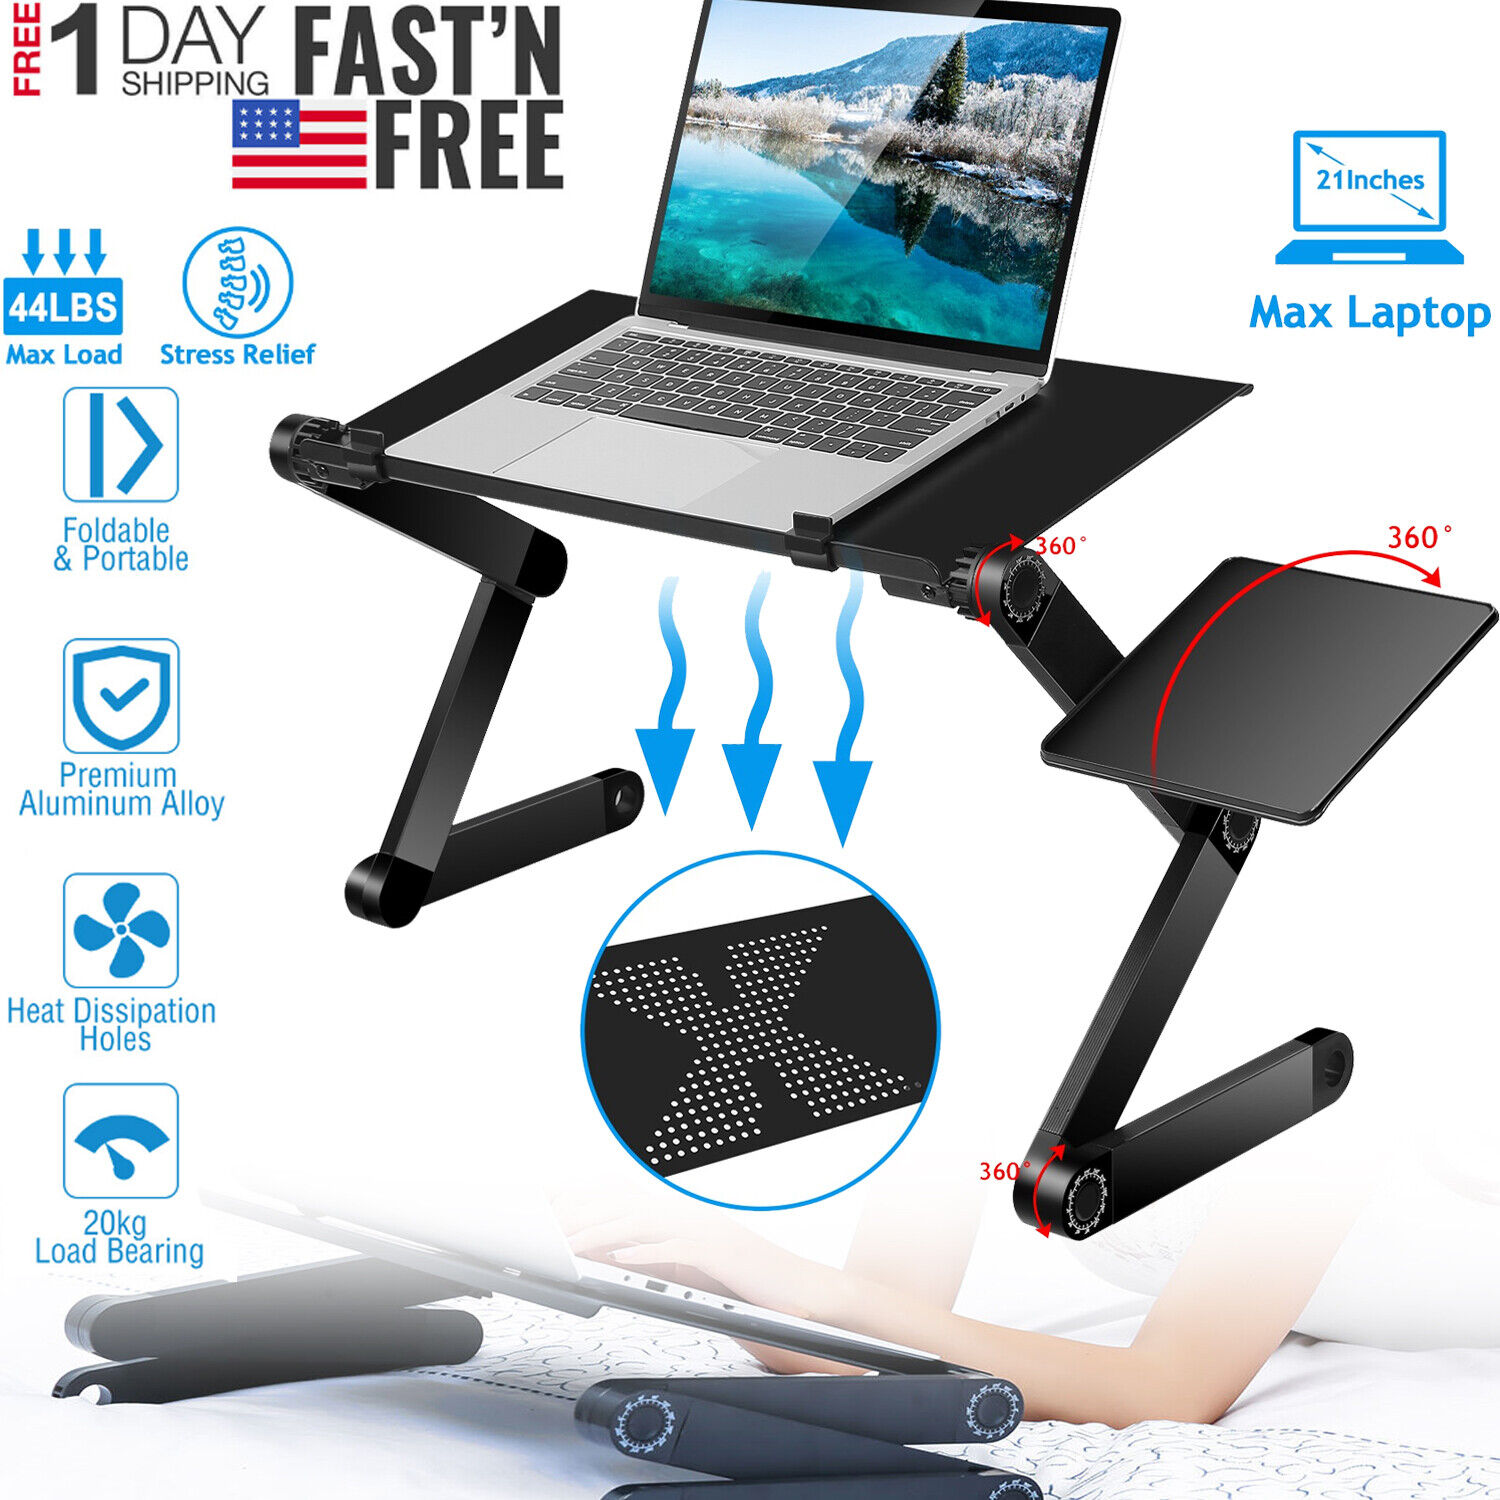 Portable Laptop Desk Foldable Lap Bed Tray Adjustable Table Stand Notebook Desk